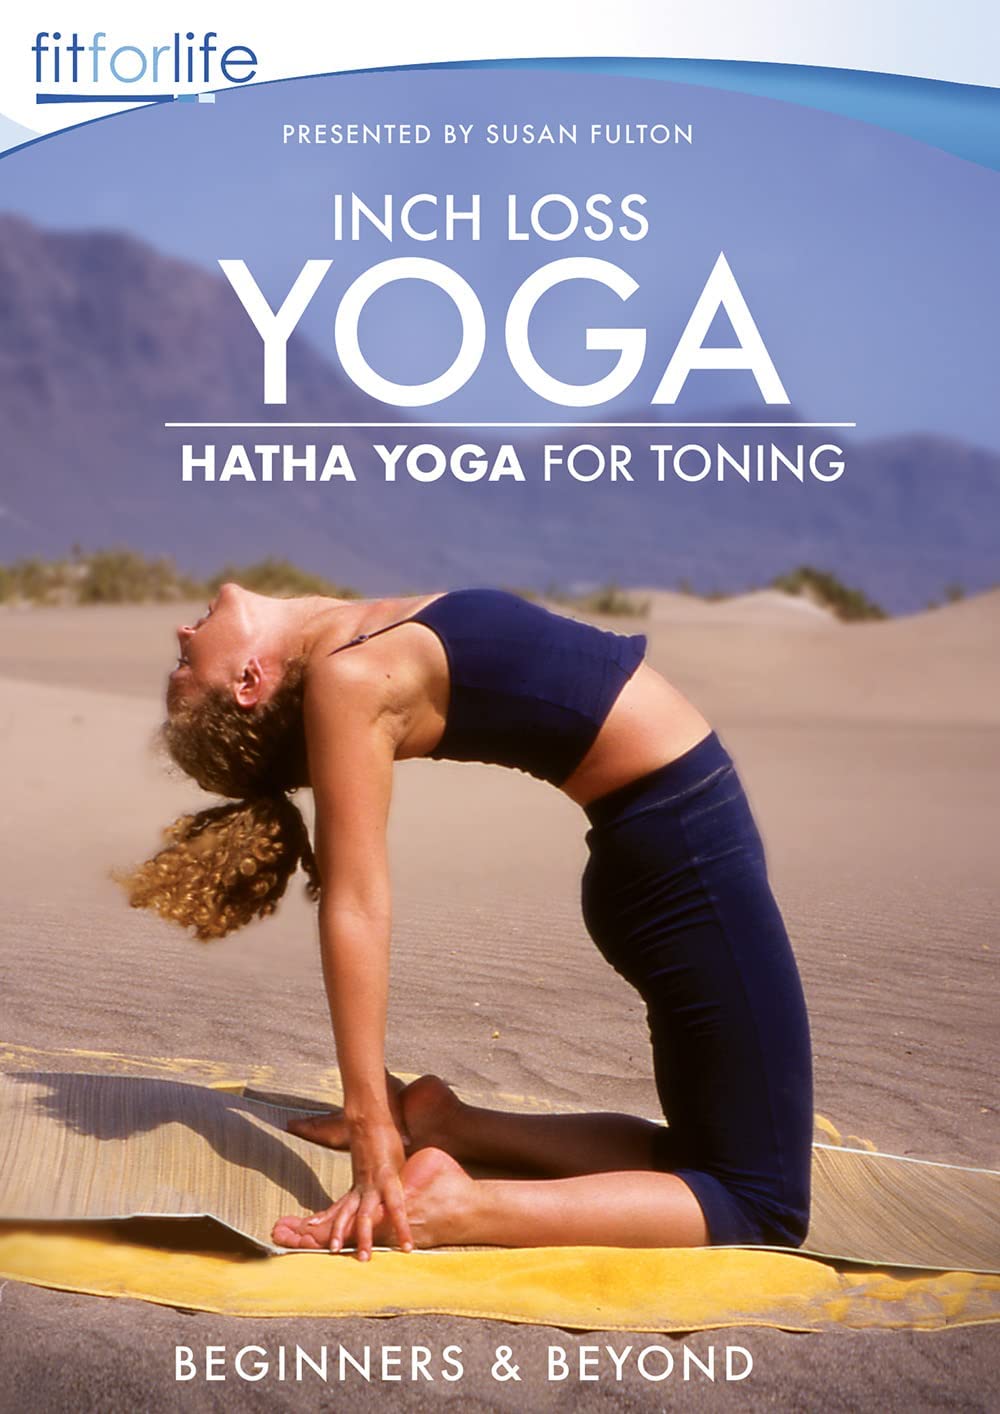 Inch Loss Yoga - Hatha Yoga for Toning - For Beginners and Beyond - Presented by [DVD]